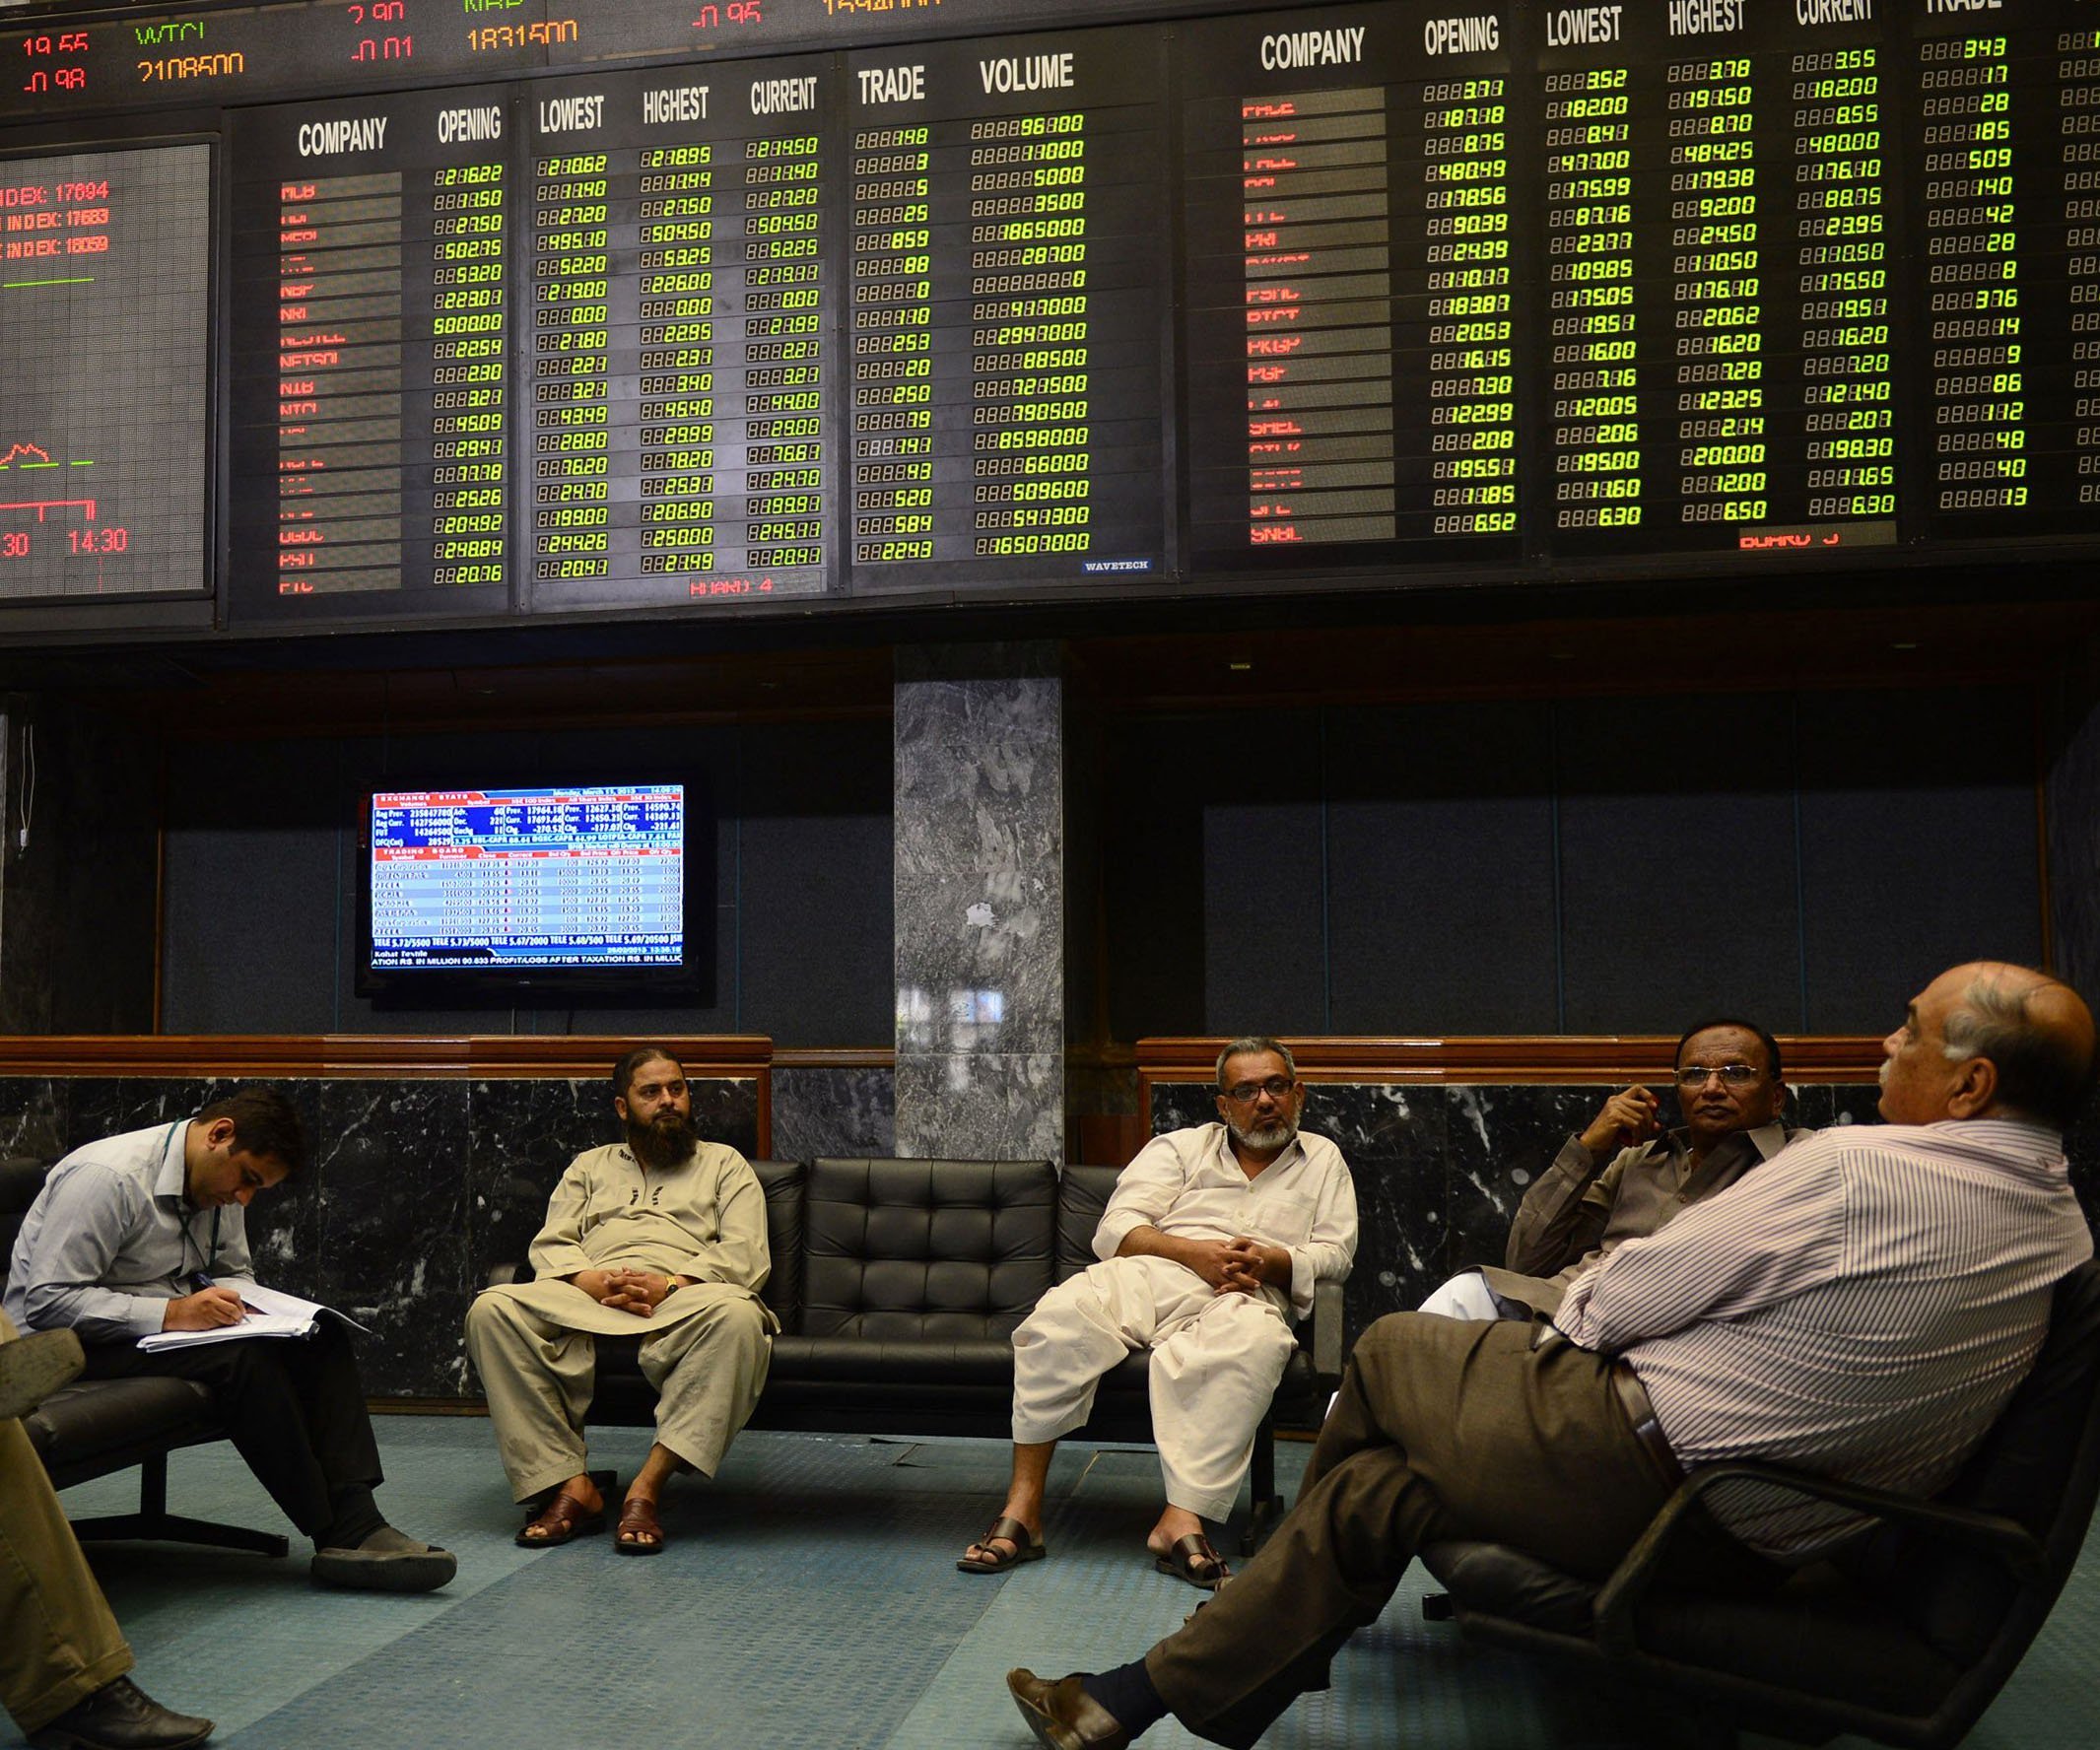 benchmark index decreases 64 08 points to settle at 33 797 51 photo afp